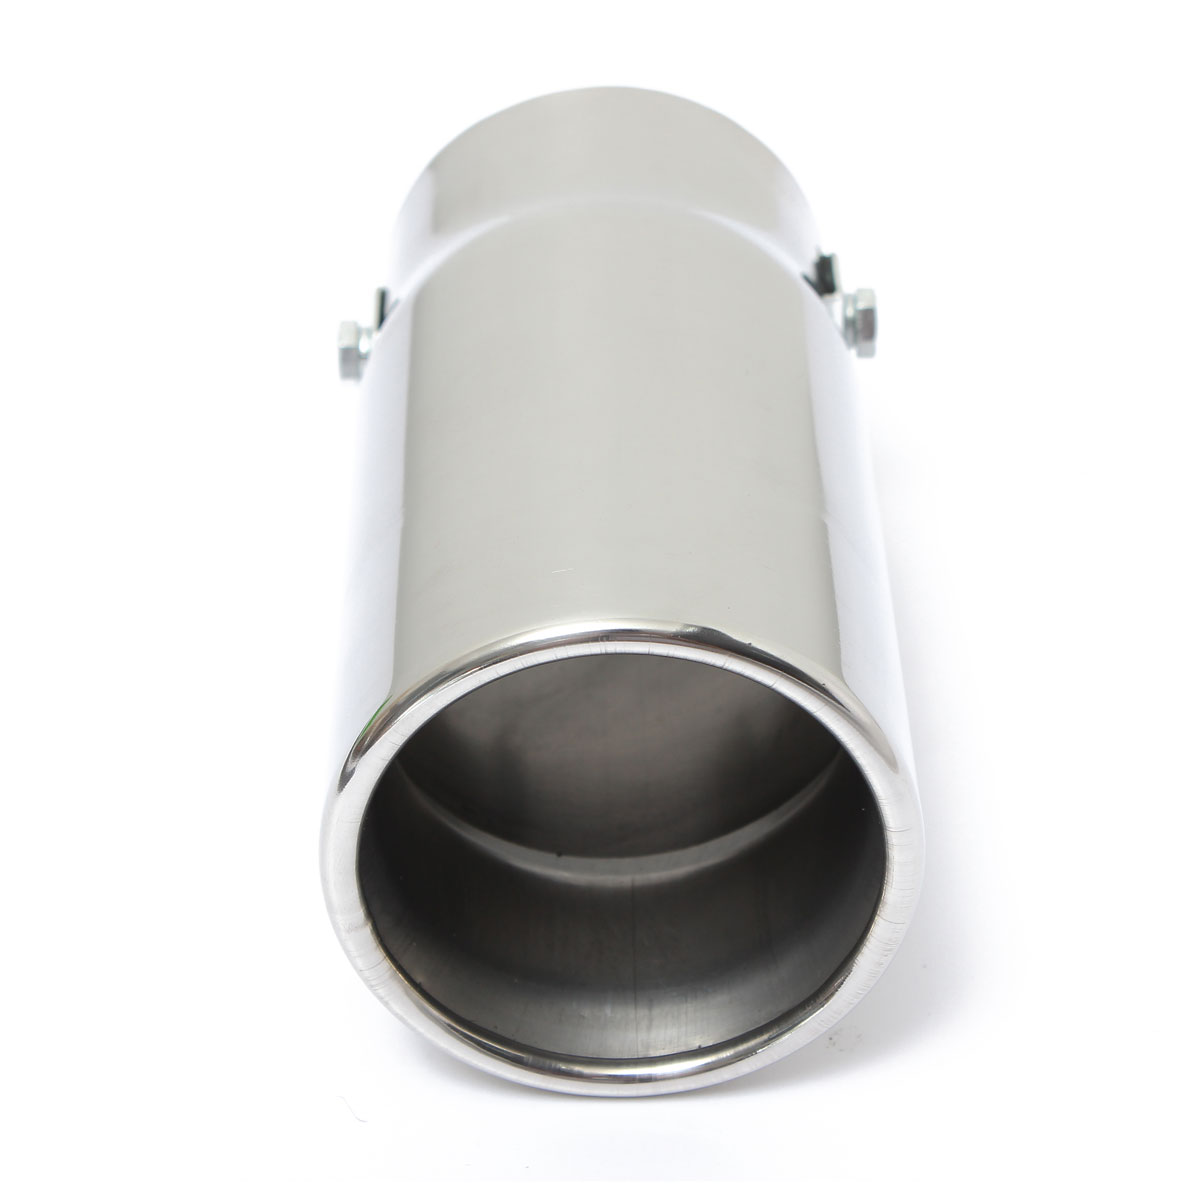 1Pcs Universal Stainless Steel Car Exhaust Tail Muffler Tip Pipe Straight tailpipe or curved tailpipe Fit Pipes Tube 3.8-5.8cm Fit pipe Diameter 1.5 to 2.3 inch 